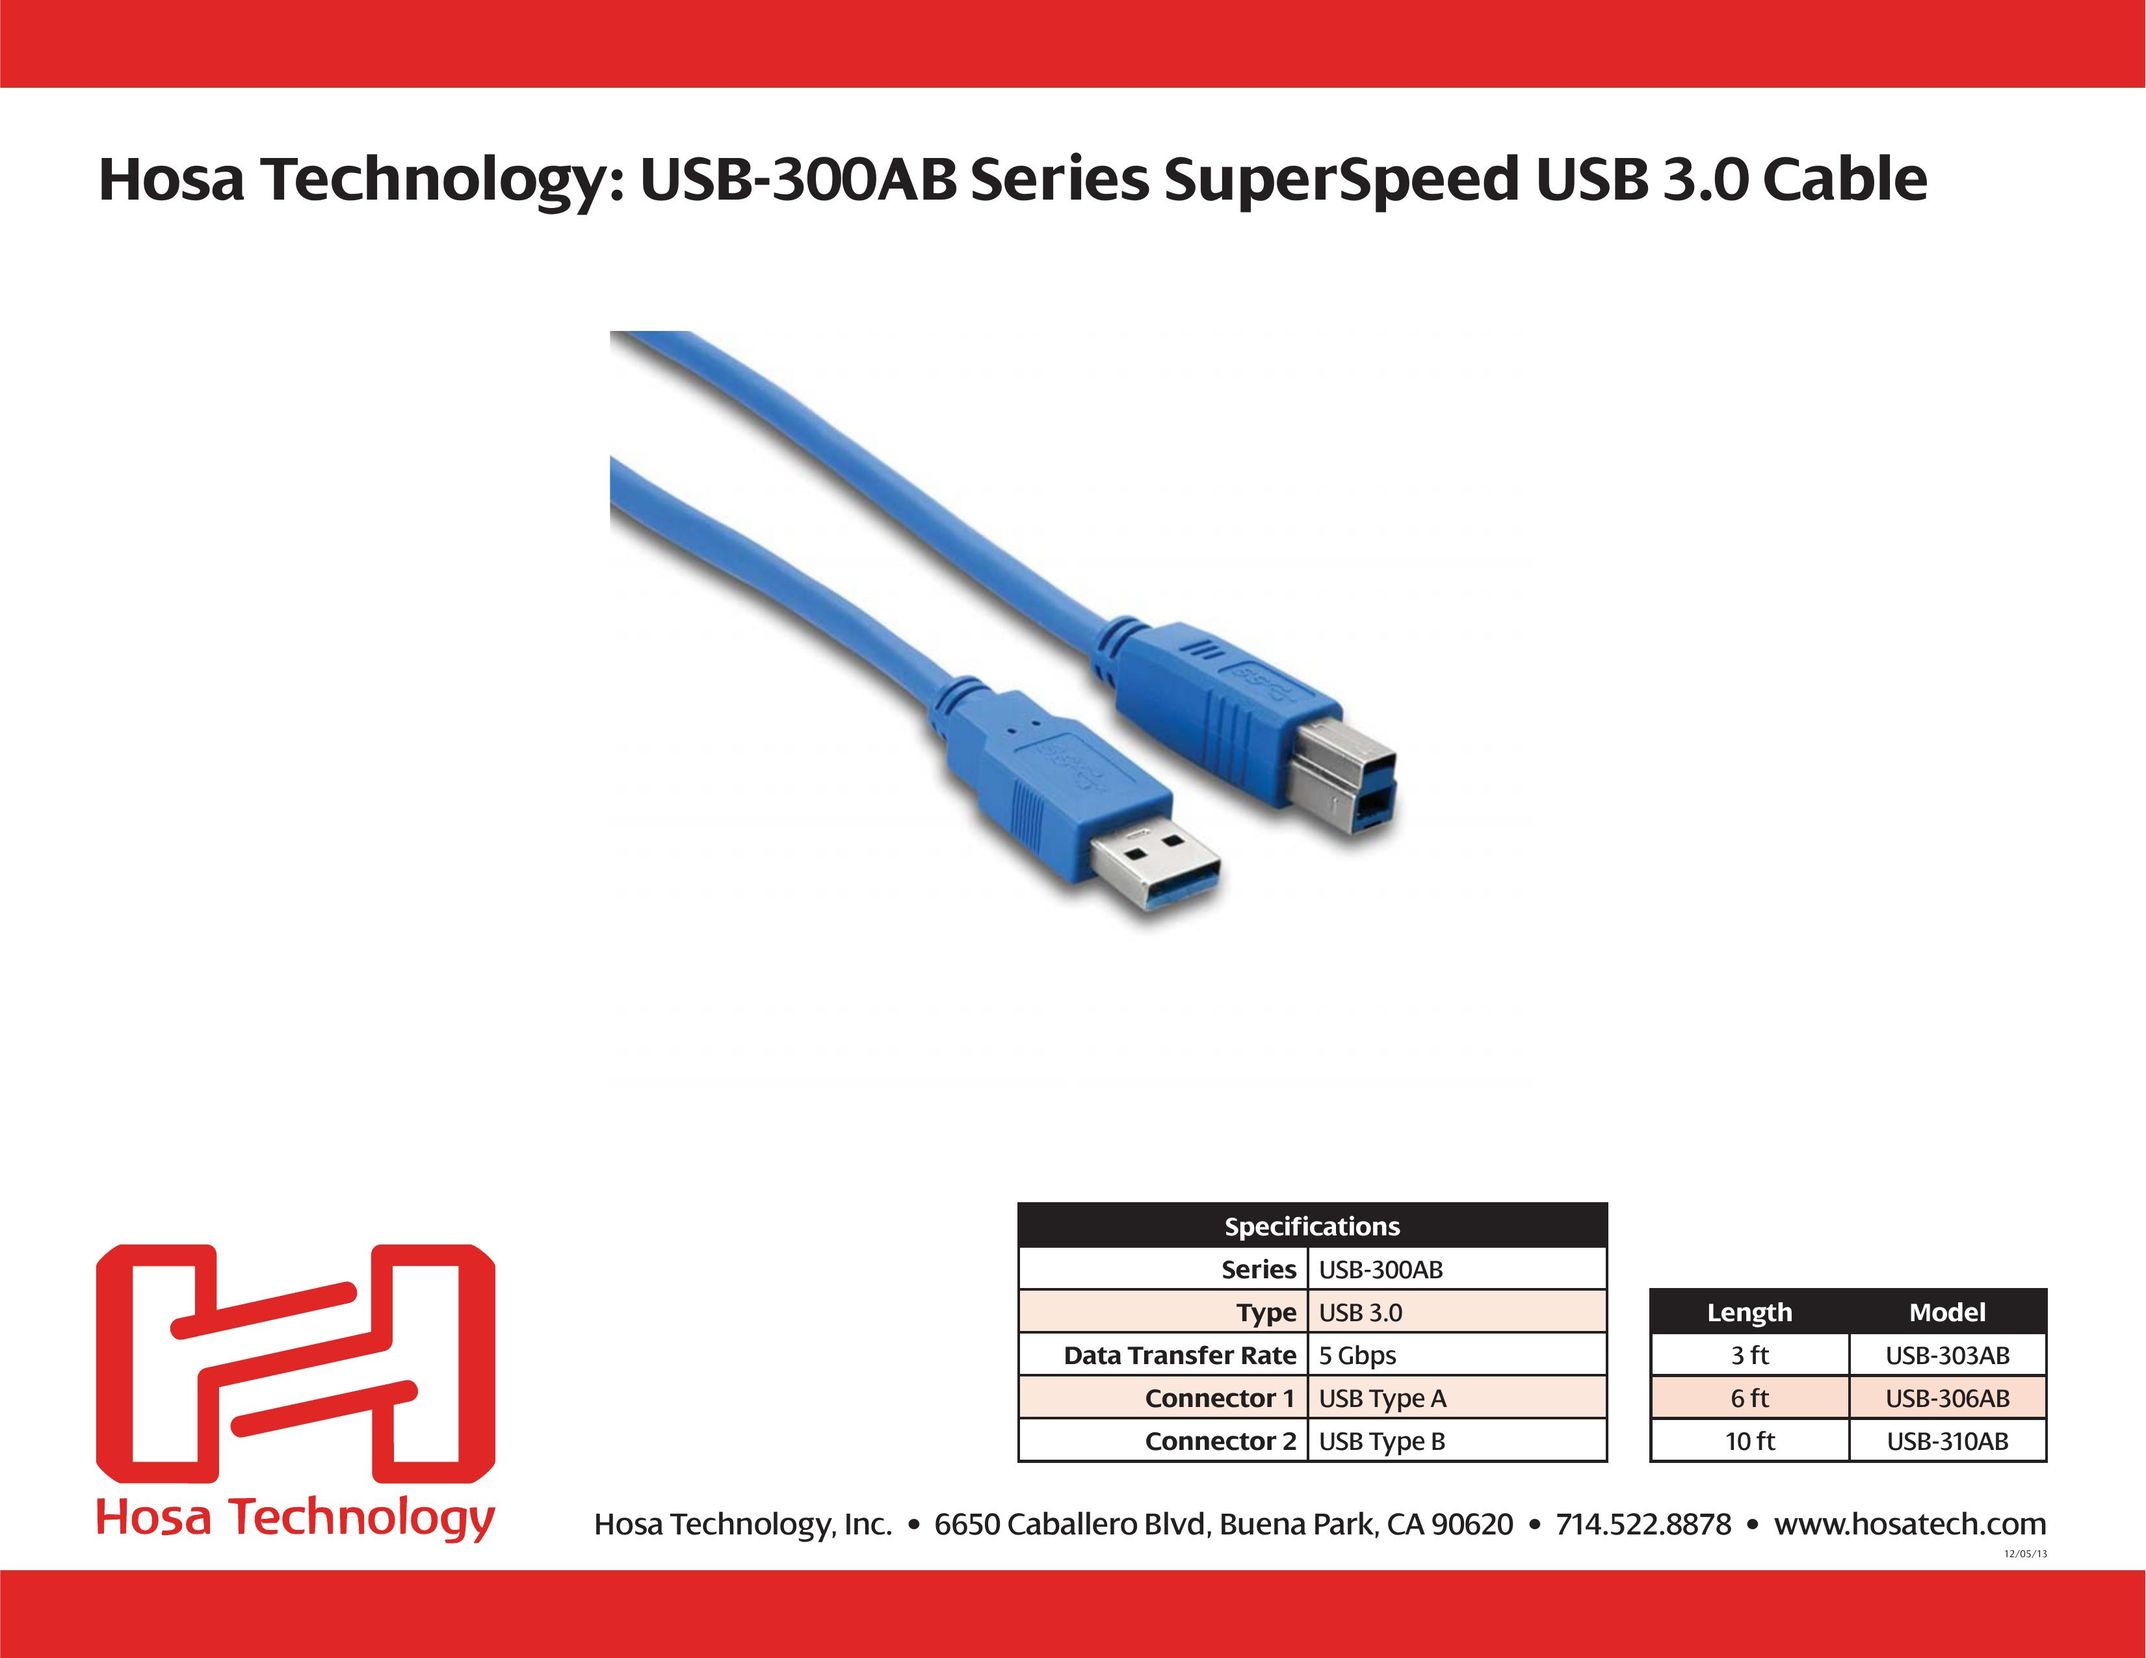 Hosa Technology 6 ft USB-306AB Network Cables User Manual